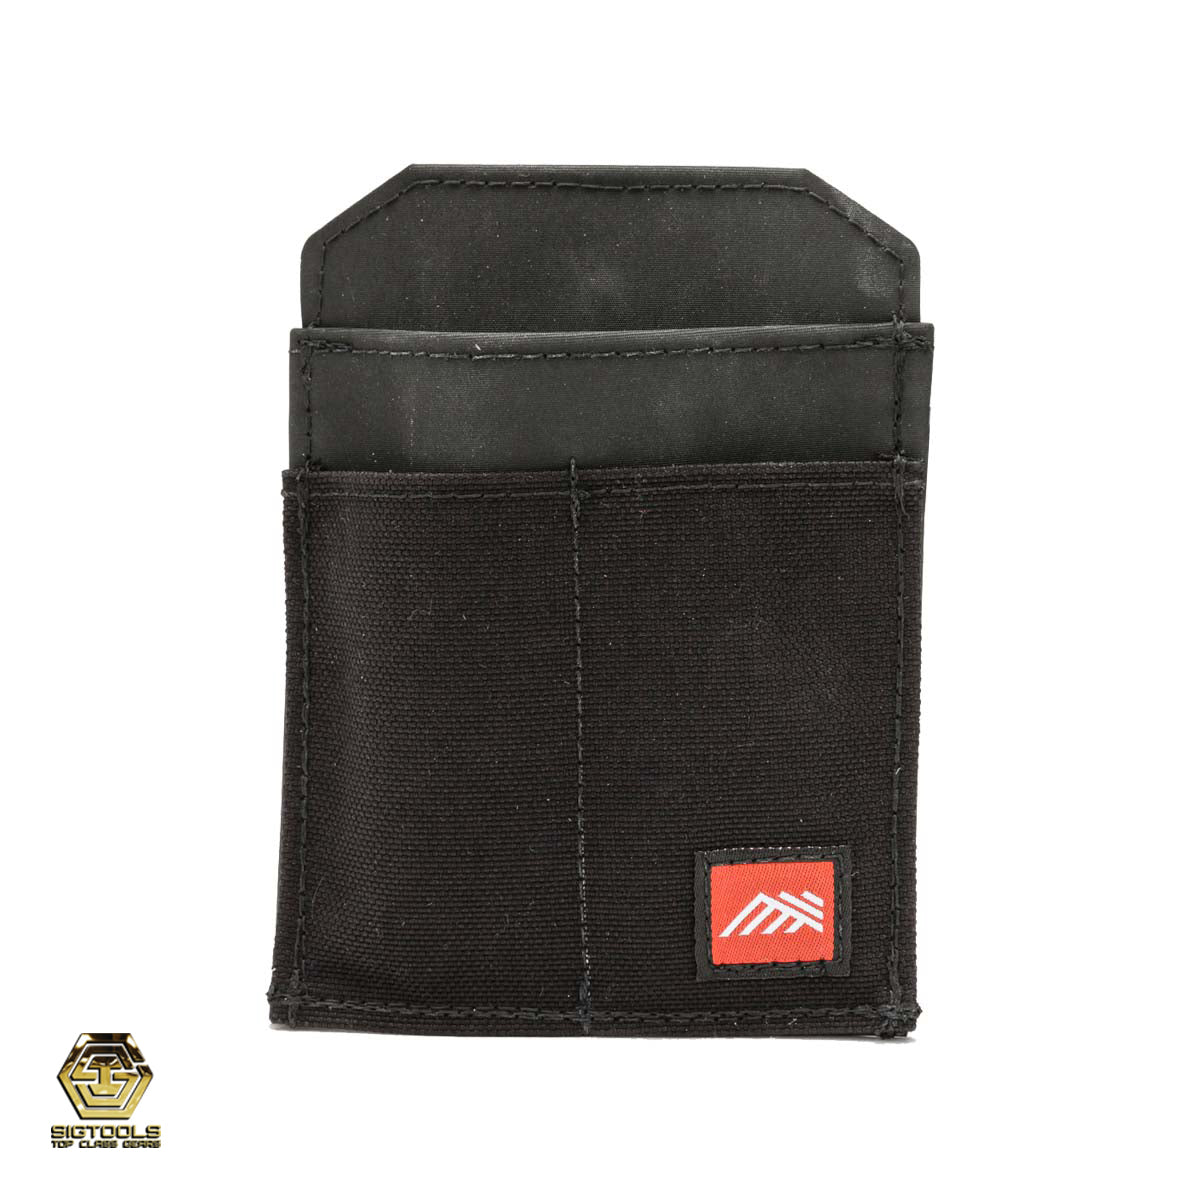 "Diamondback 717 Utility Pocket - Empty, Ready for Notepads, Tools, and Accessories"